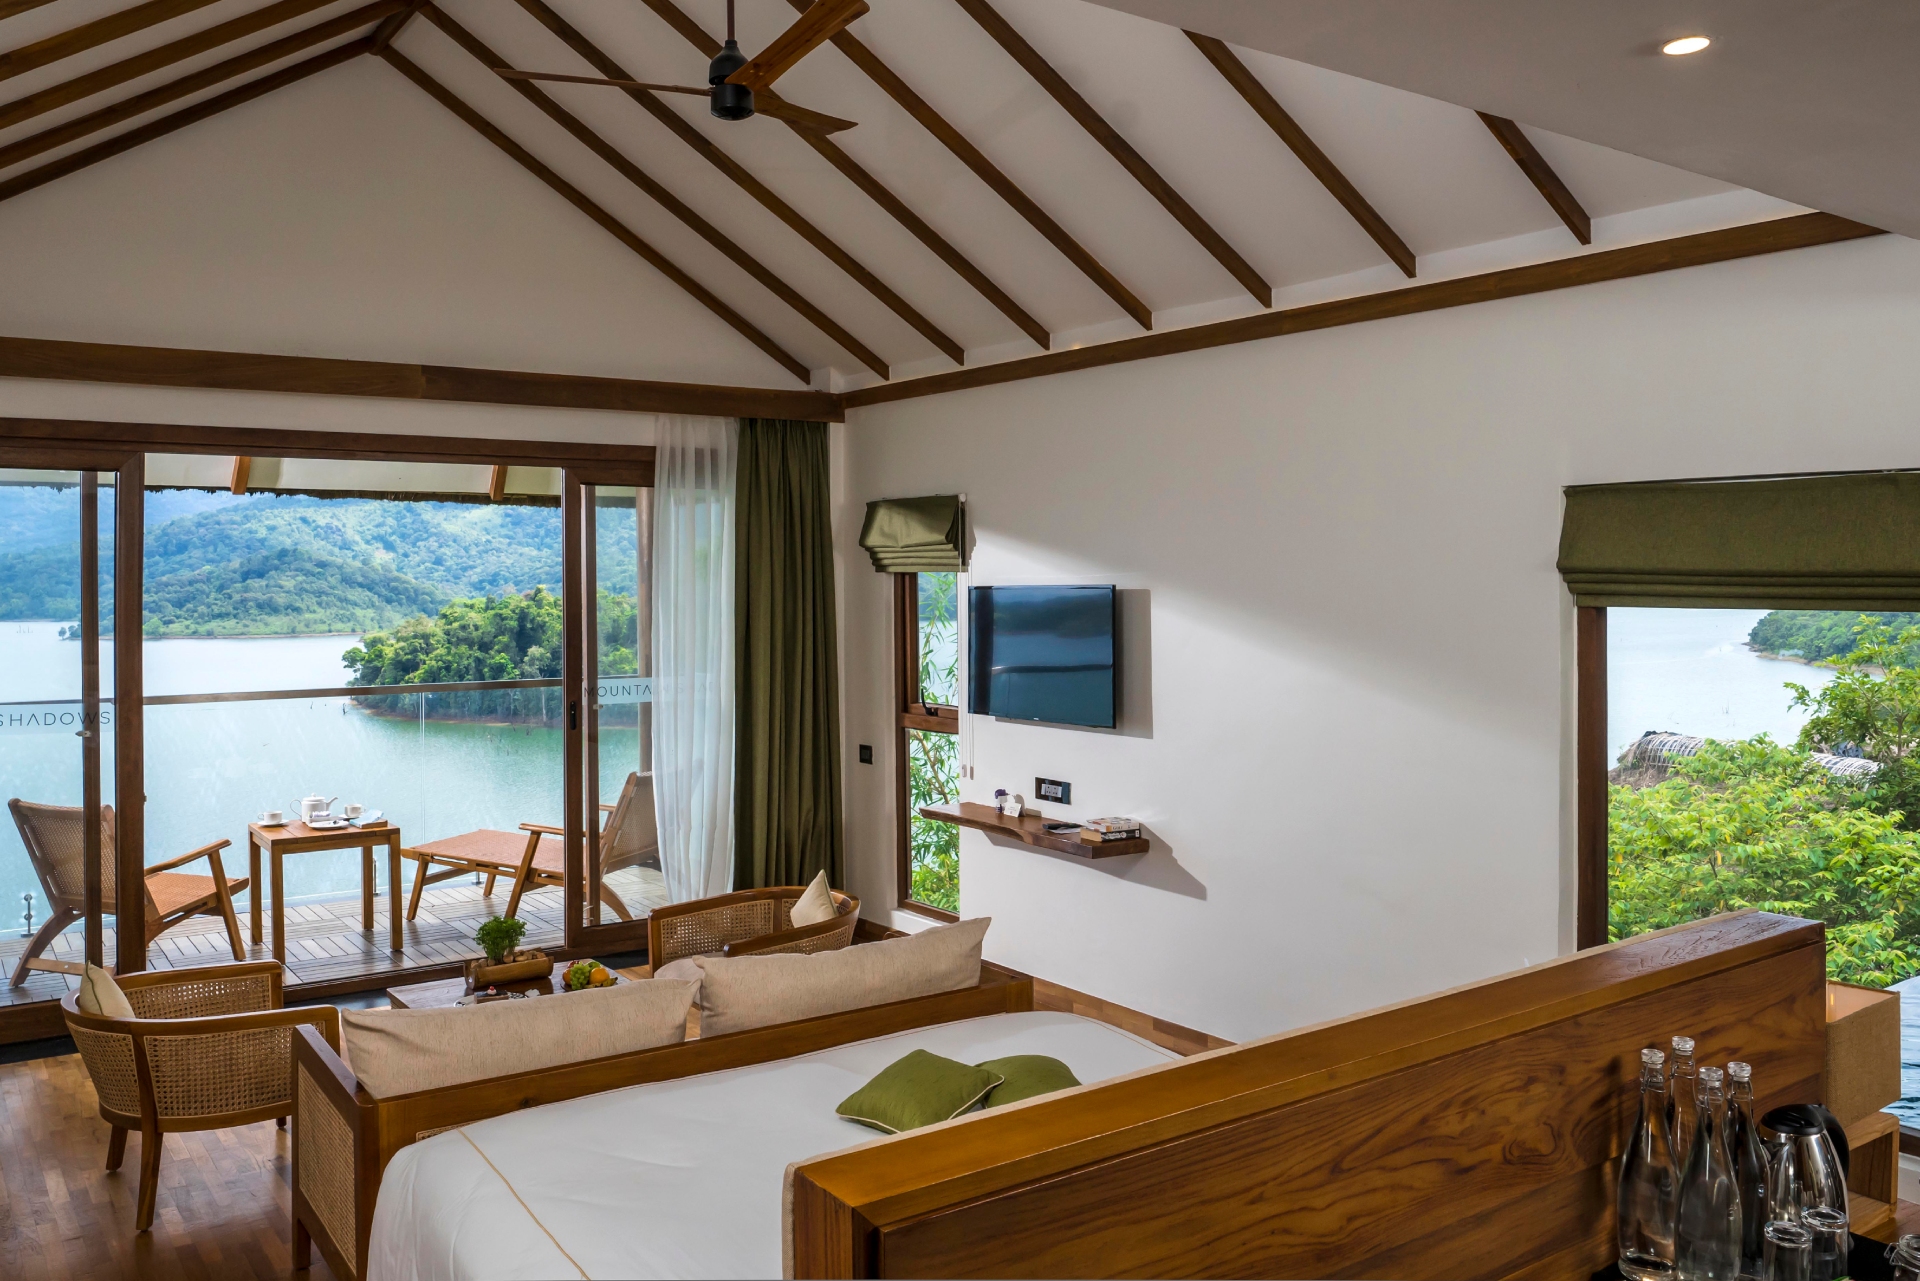 A view of the bedroom inside the private pool villa at Mountain Shadows resort in Wayanad